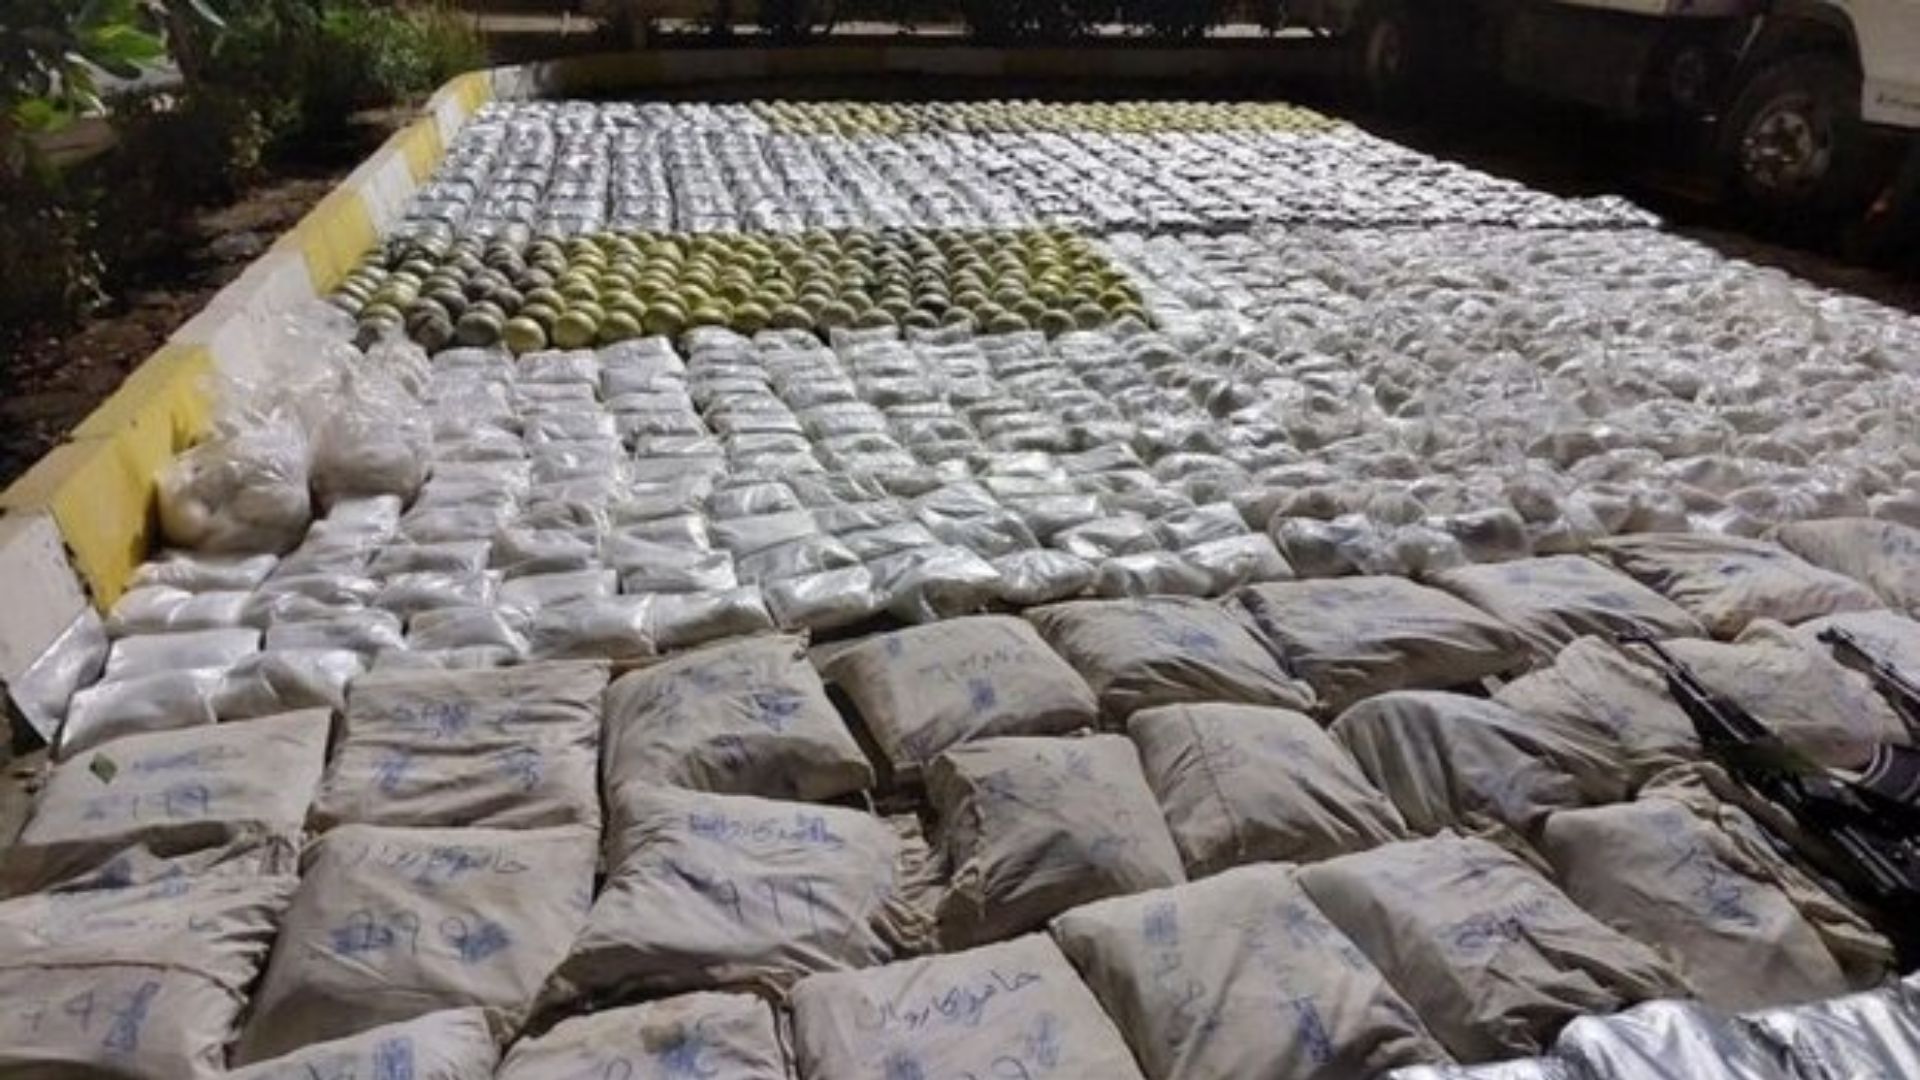 ANF confiscates more than one ton of drugs in operations across the country